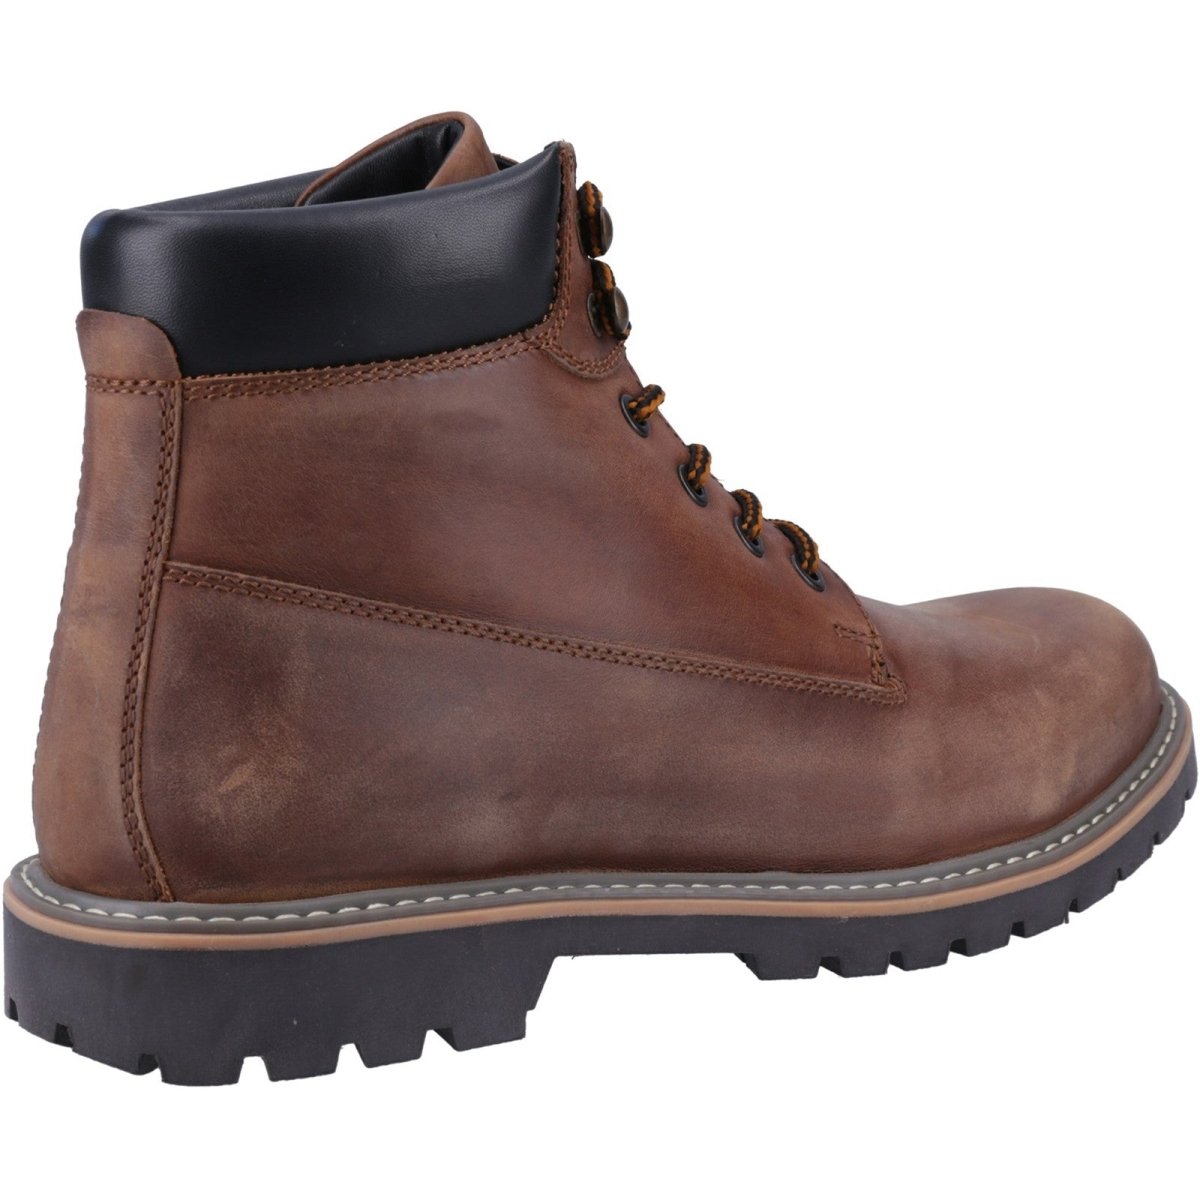 Cotswold Pitchcombe Boots - Shoe Store Direct